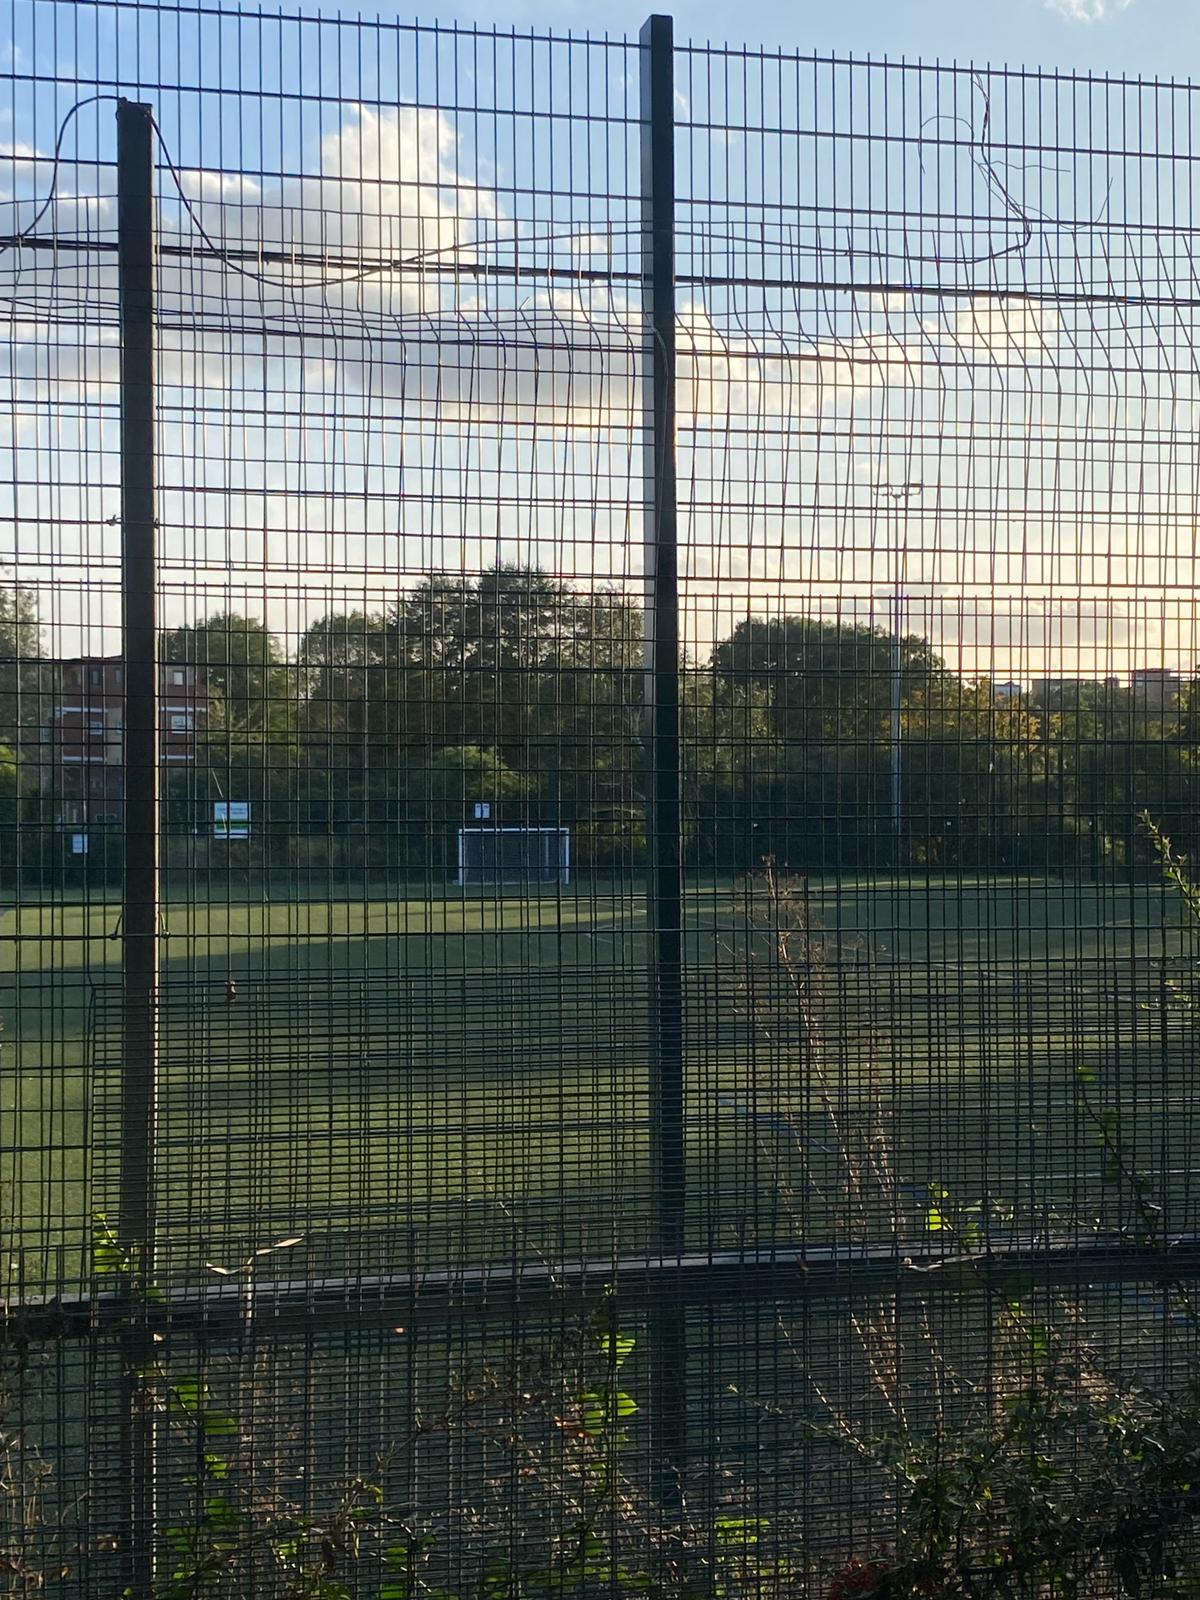 Girls were left without a football pitch to train in after they turned up to training at Stepney Green Astro to discover they had been replaced by a boys group